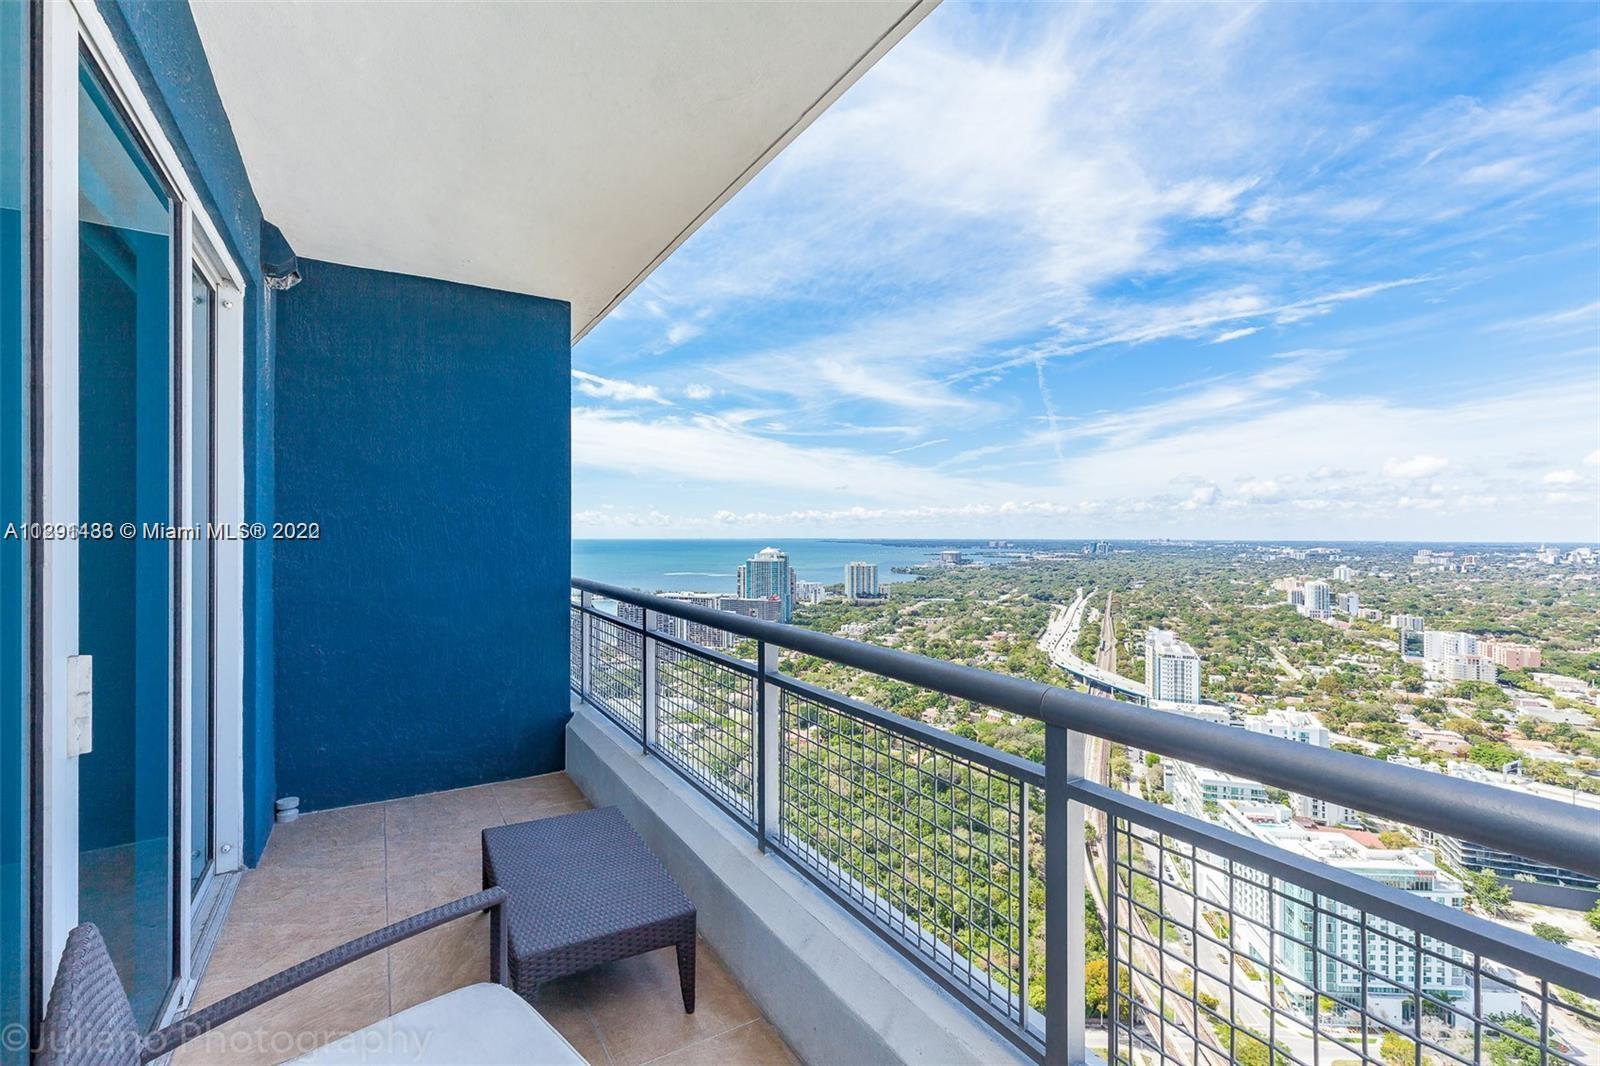 Photo 1 of Infinity Apt 4205 in Miami - MLS A11291433